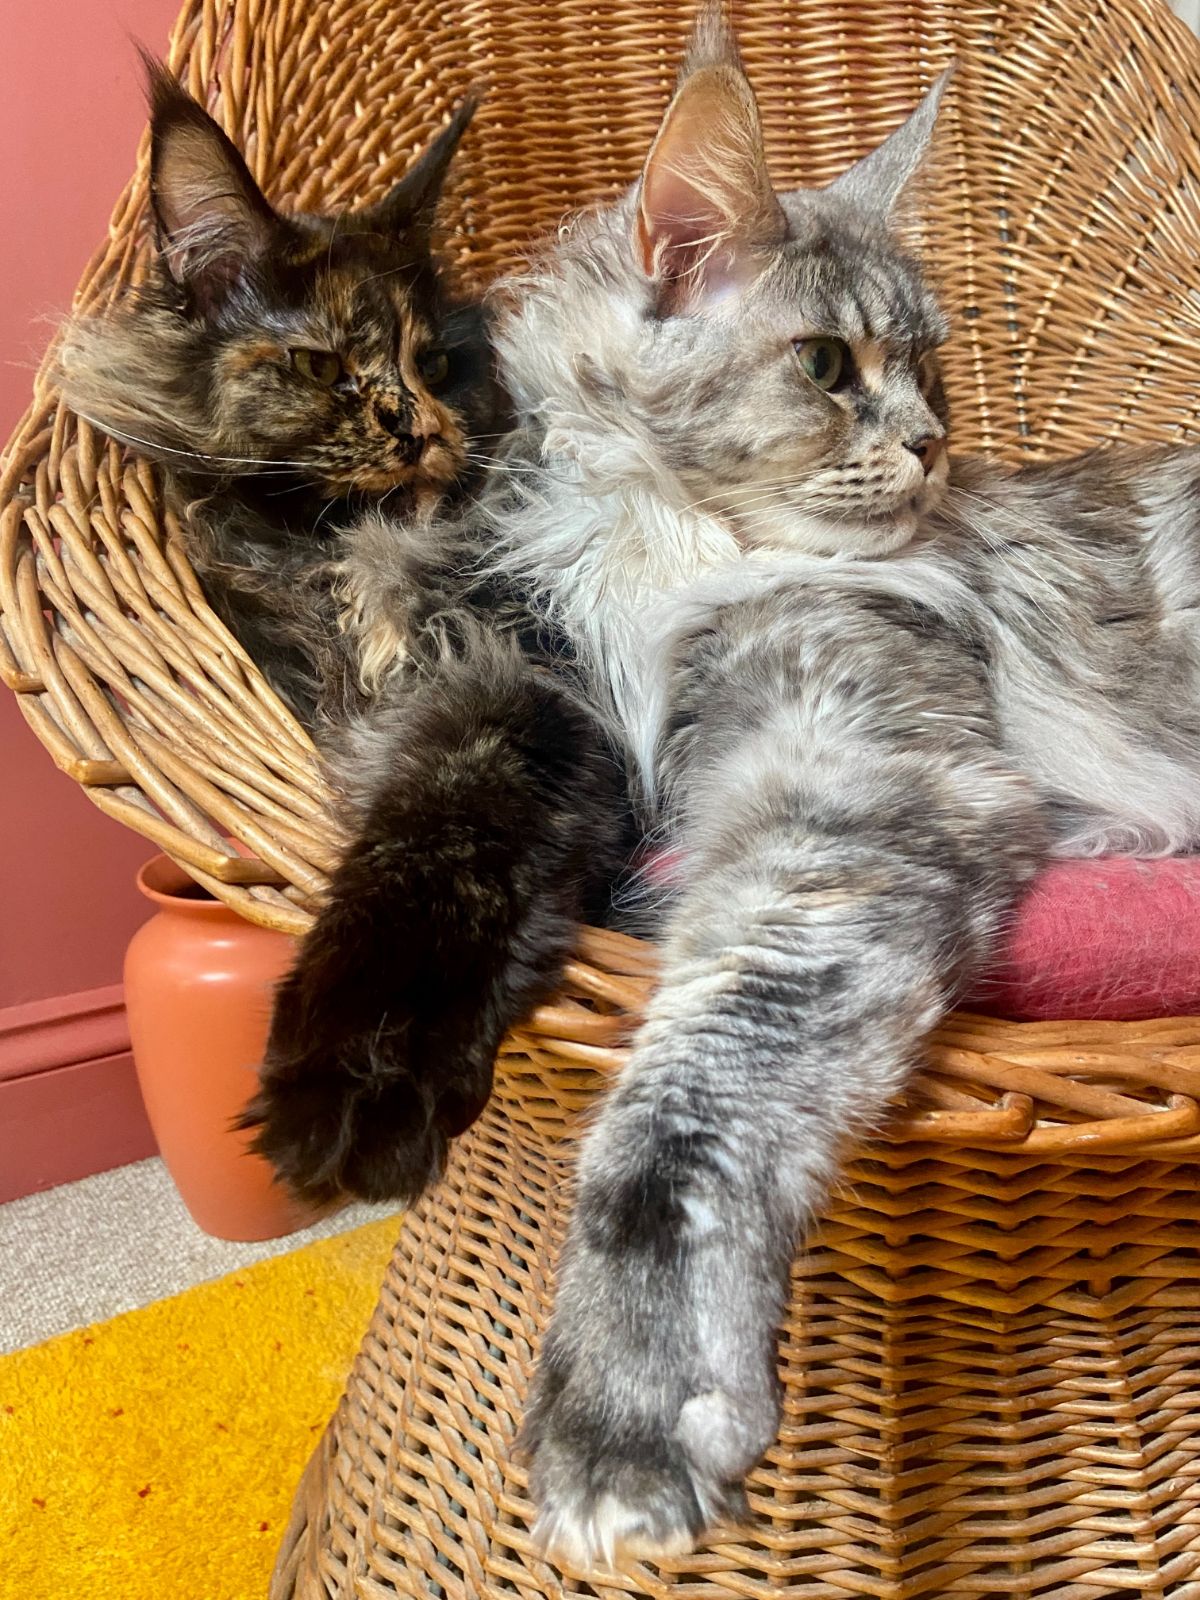 Two beautiful maine coons lying in a cat bed.